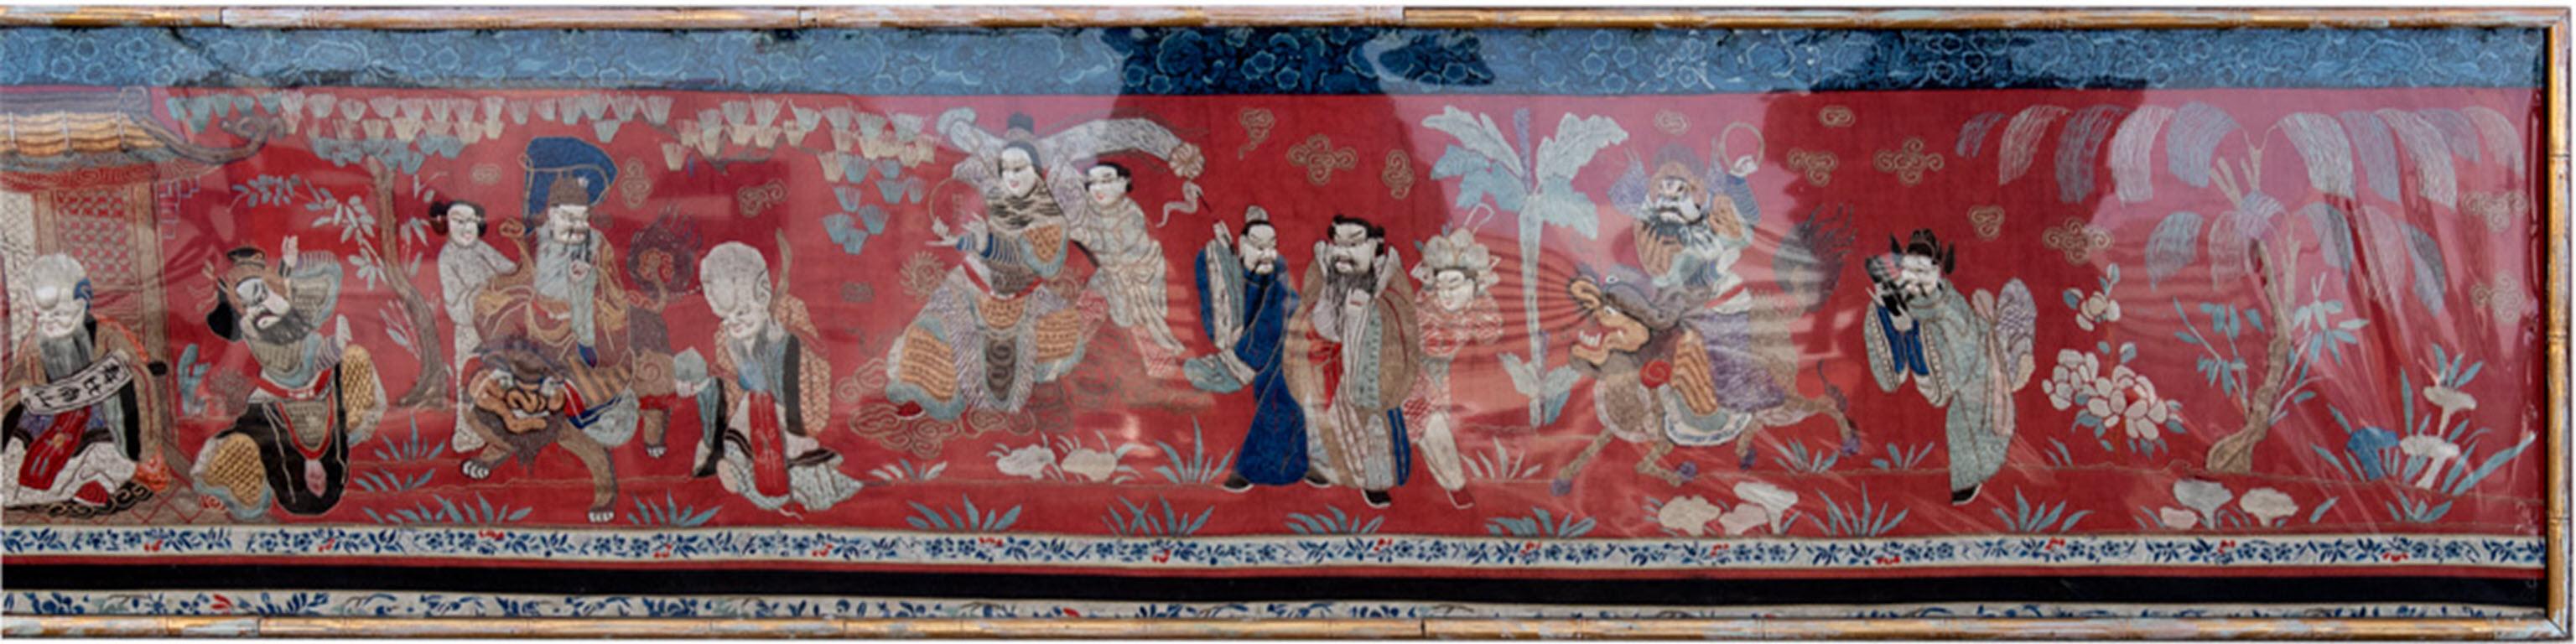 Depicting the gathering of the Luohan around the central figure of the Chinese Emperor Qin Shi Huang under a pagoda, dating to the mid-19th century.

Measures: 18 x 144 x 2 in.